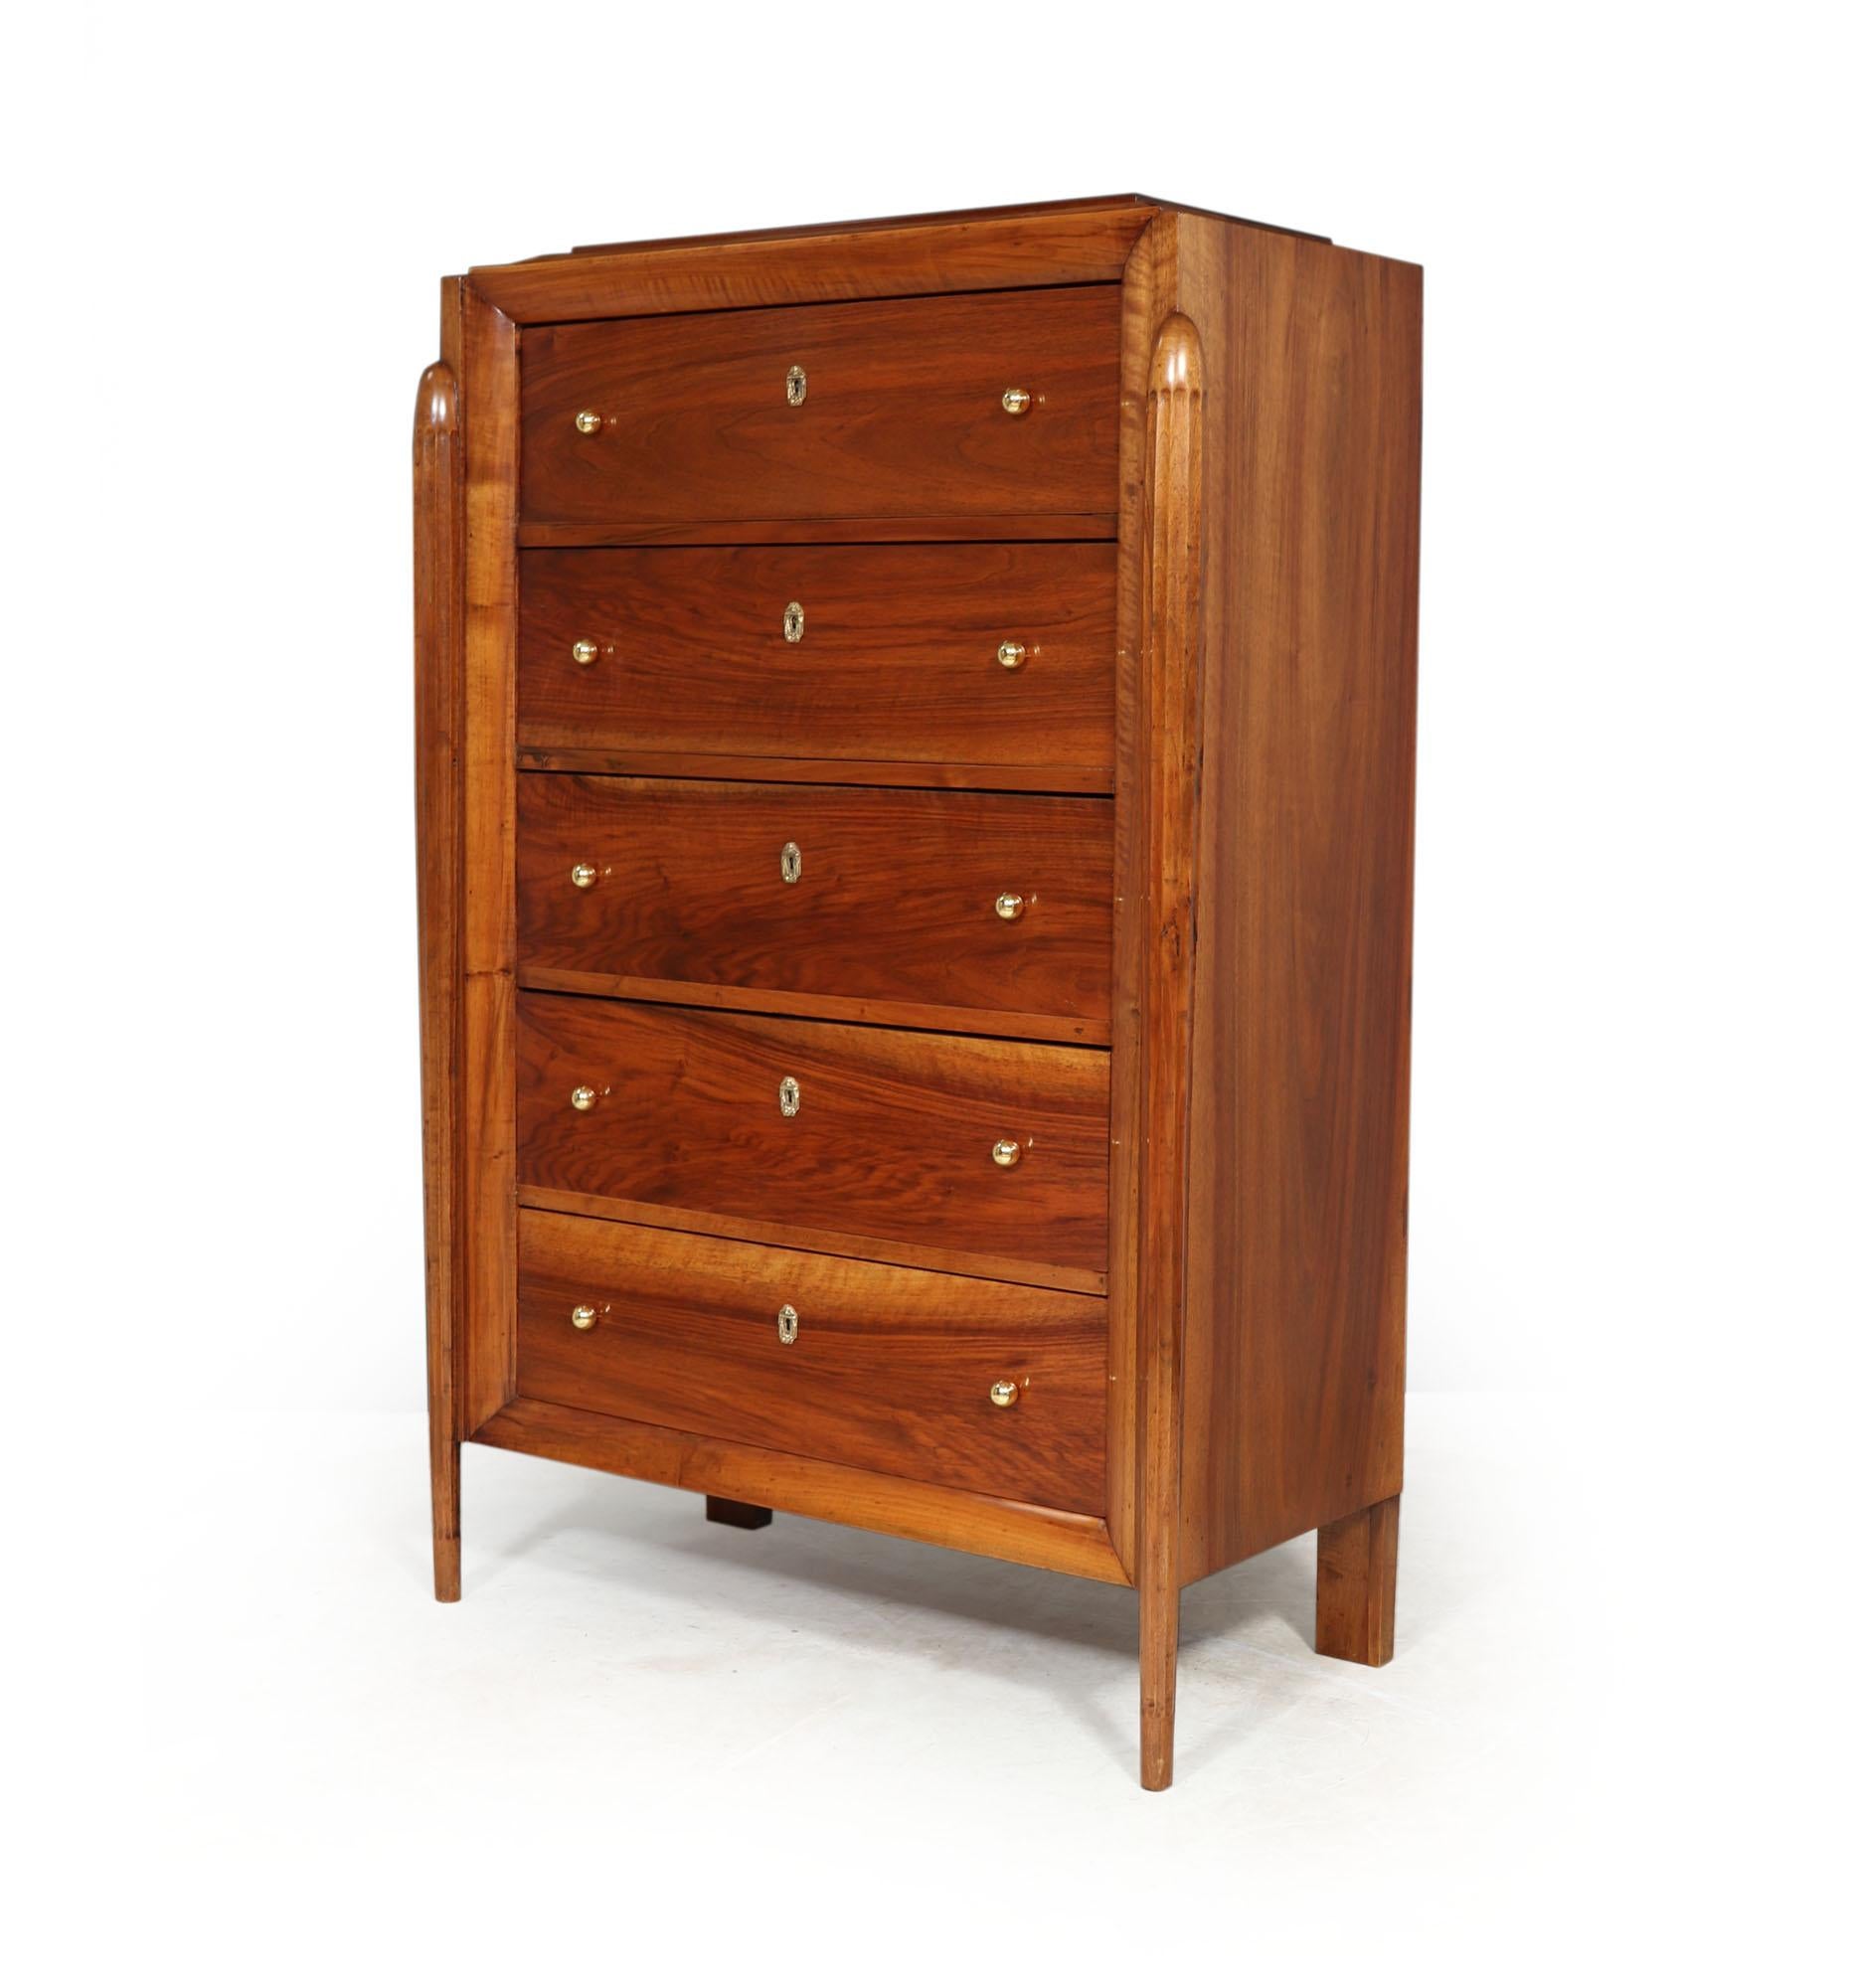 Early 20th Century French Art Deco Tall Walnut Chest of Drawers